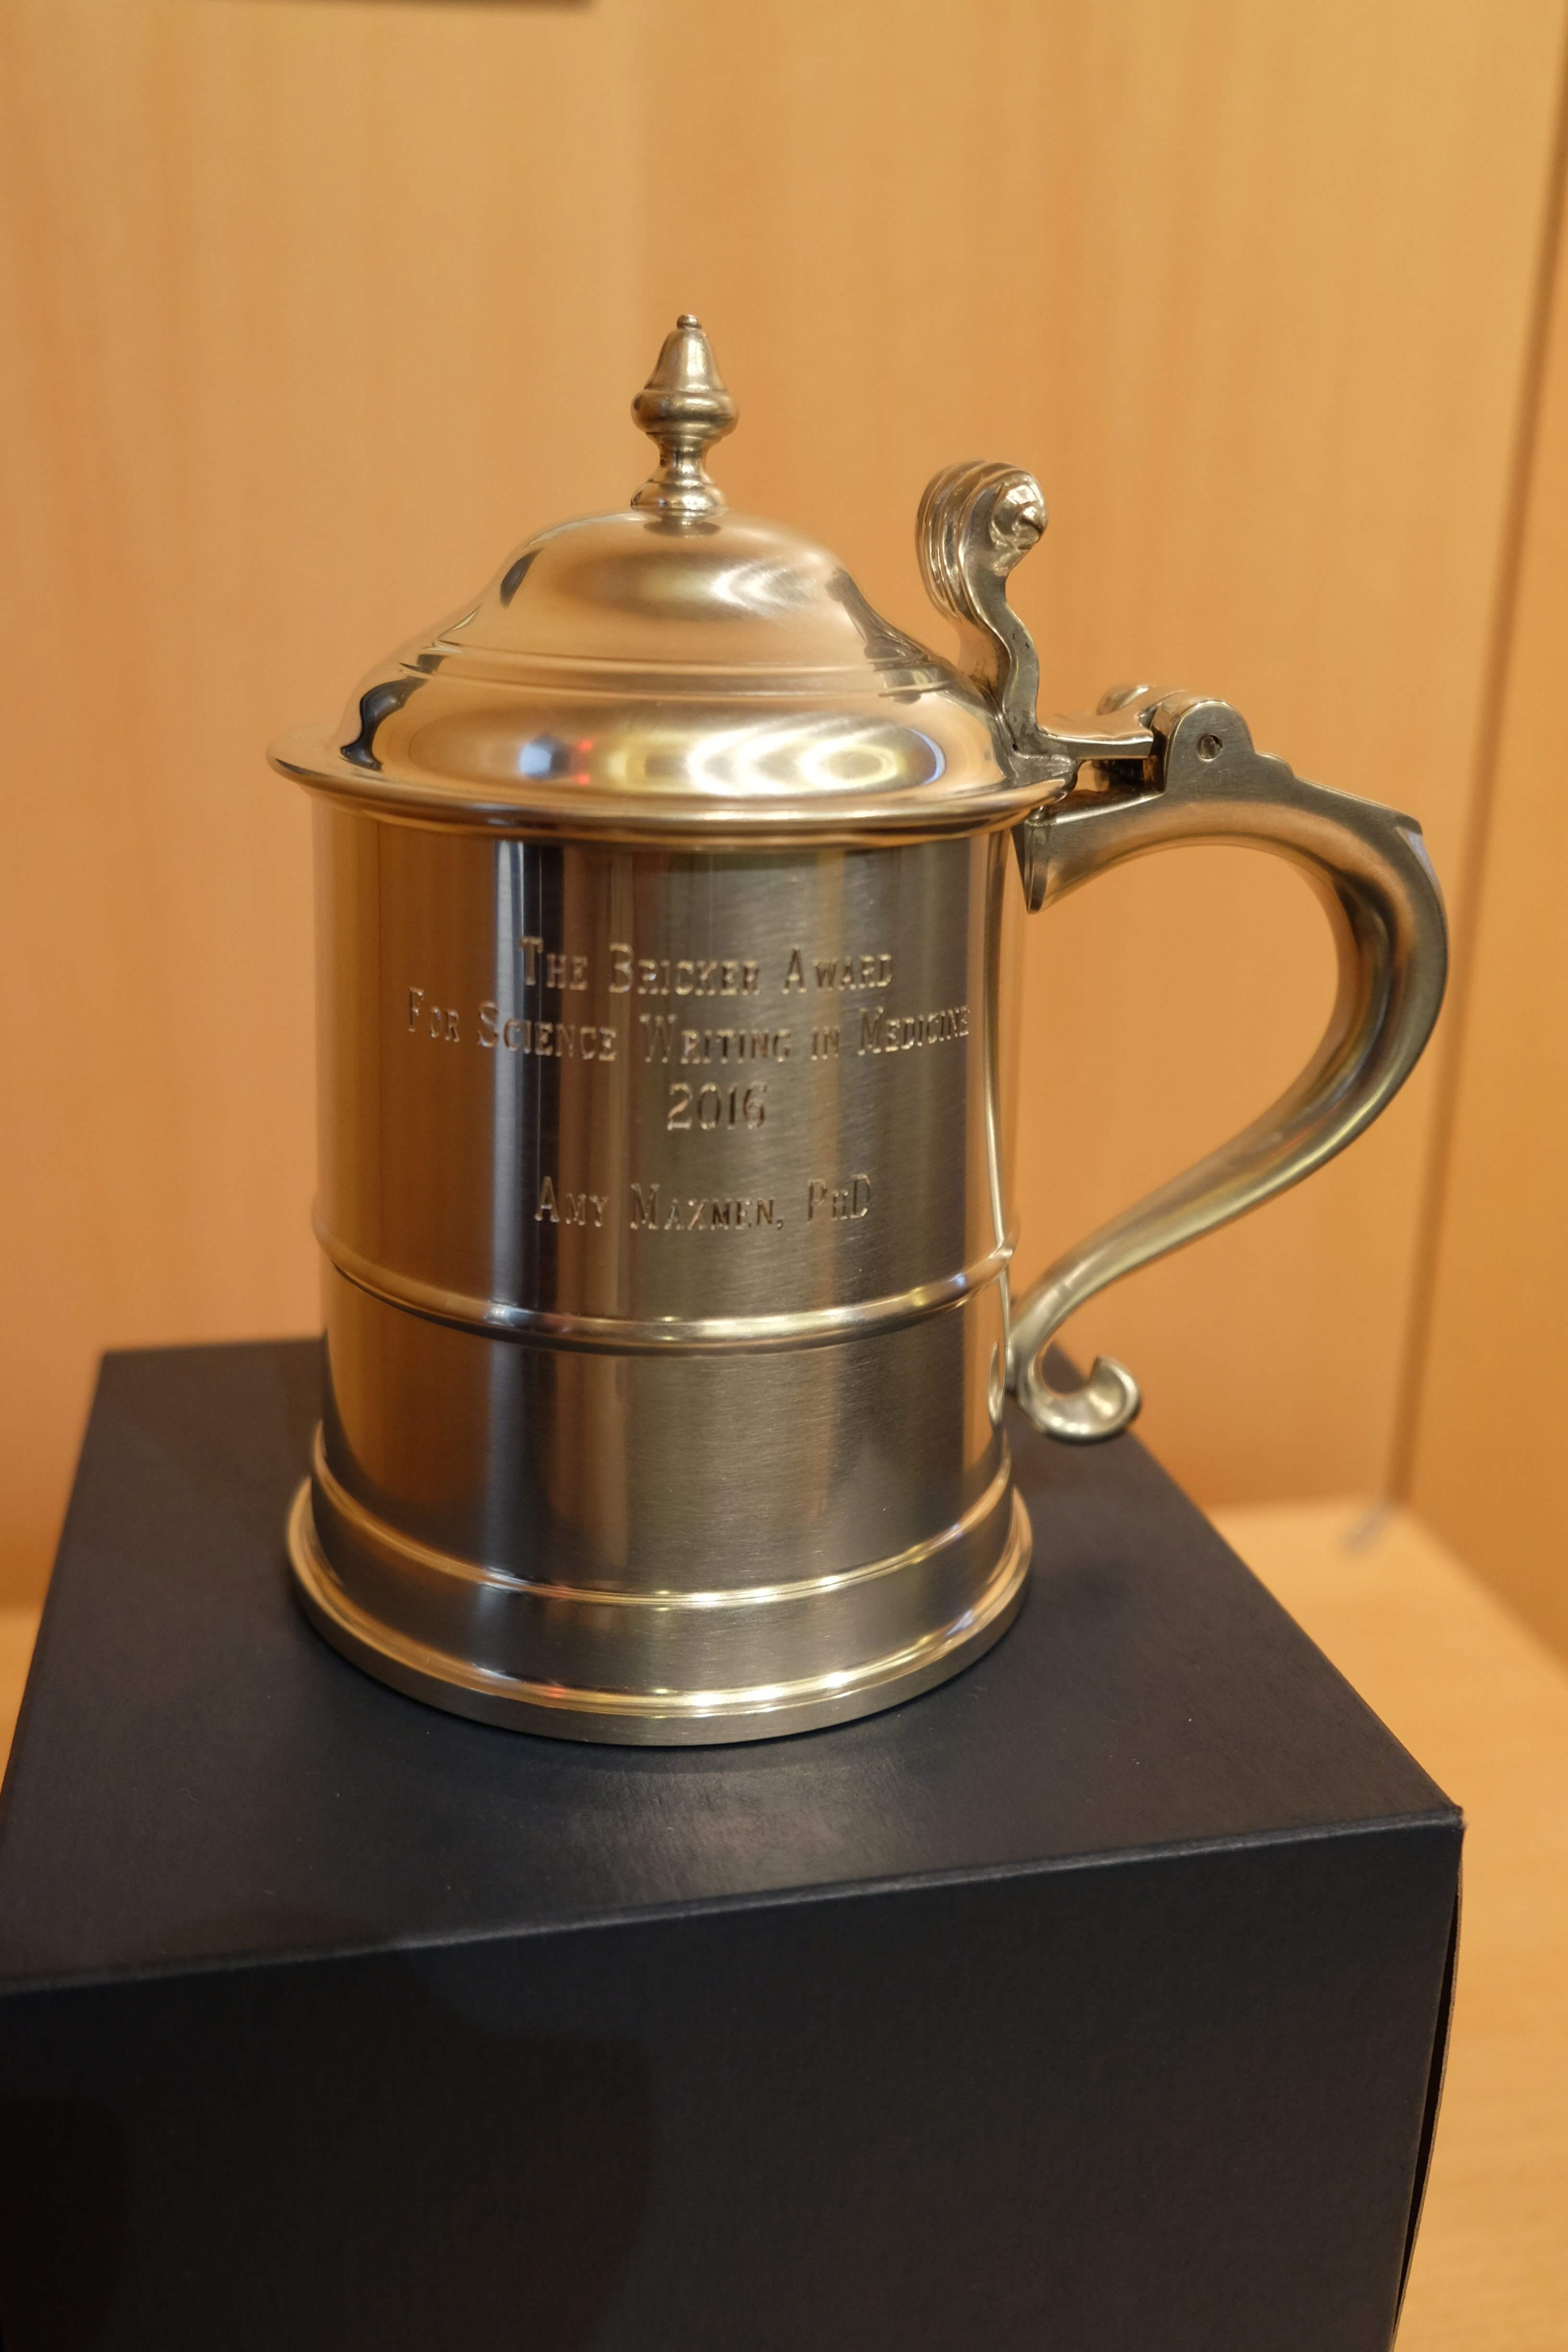 The award is an engraved, silver-plated beer stein—an homage to David Bricker’s self-proclaimed passion for craft beer, and surely one of the science writing profession’s most unique awards. (Photo credit: Doris Huang, Houston Methodist)